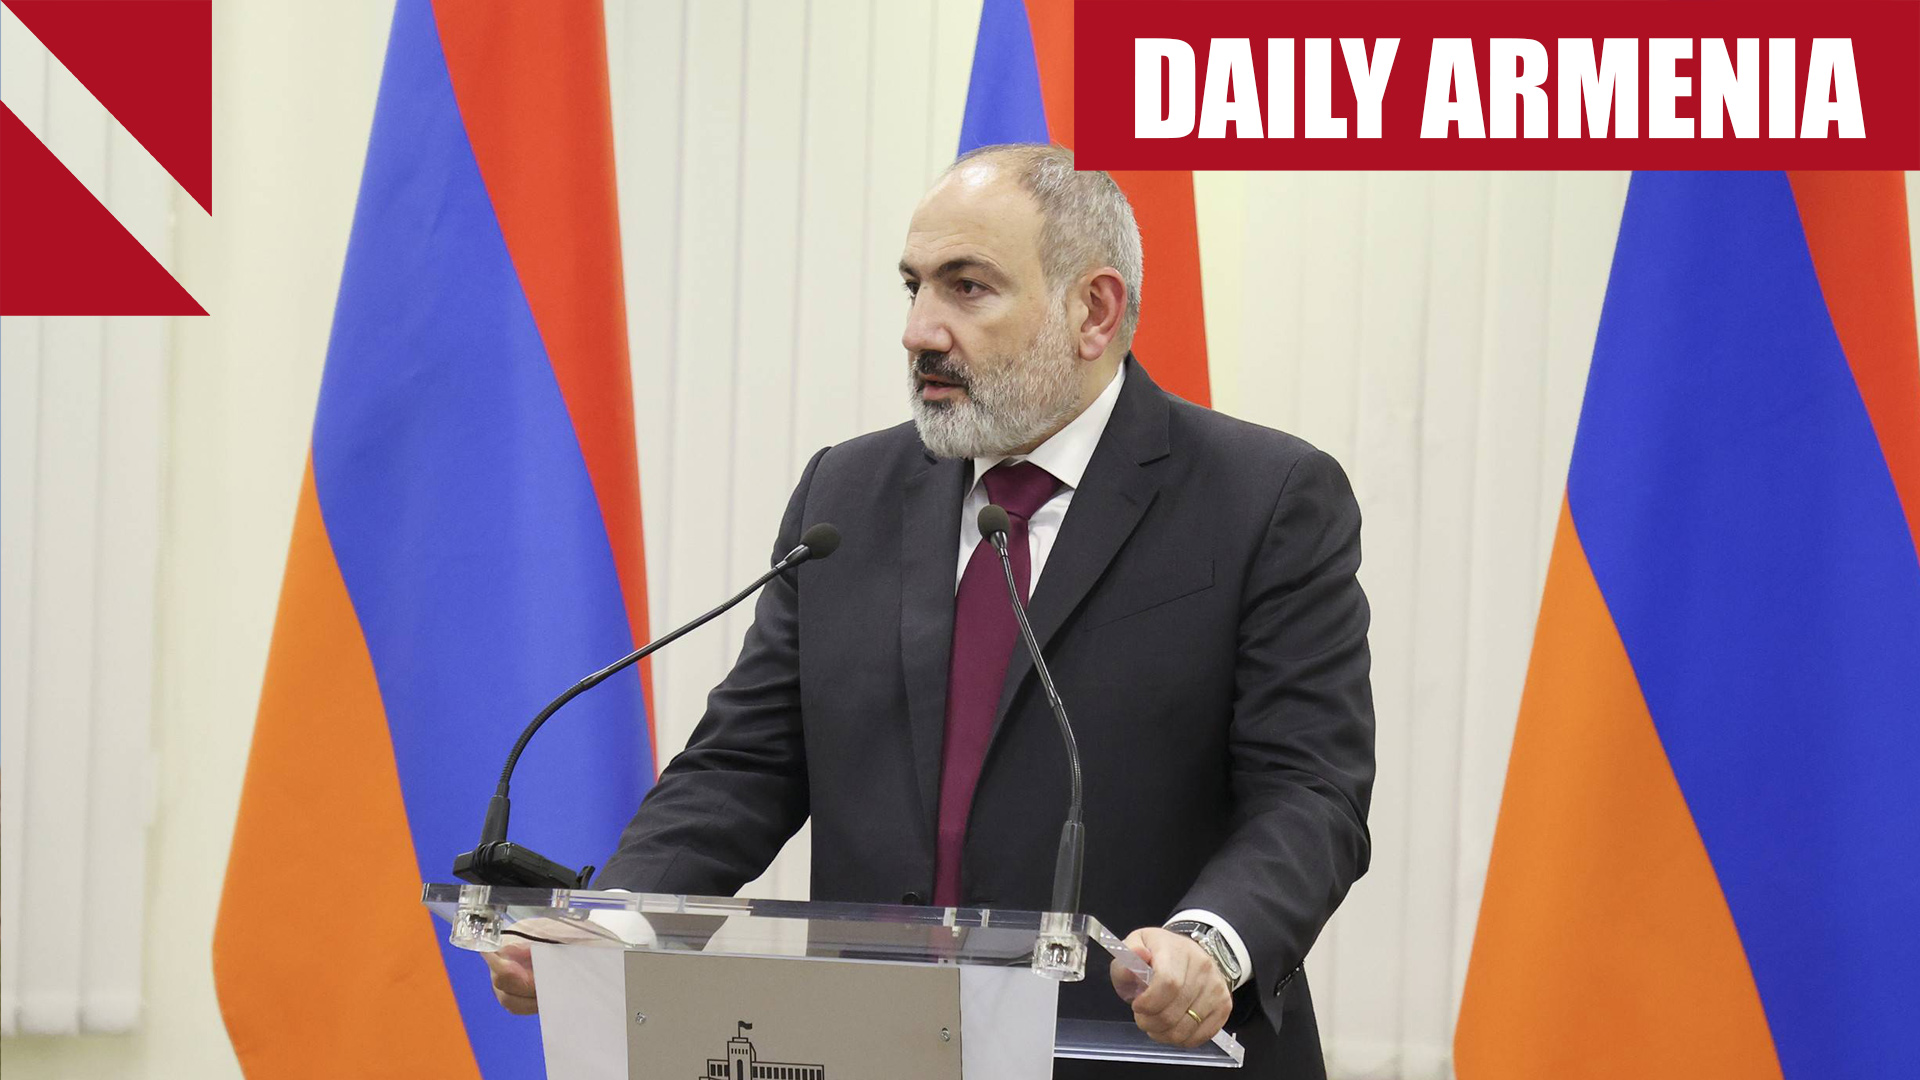 Pashinyan Indicates Regional Actors May Be Trying to Undermine Peace